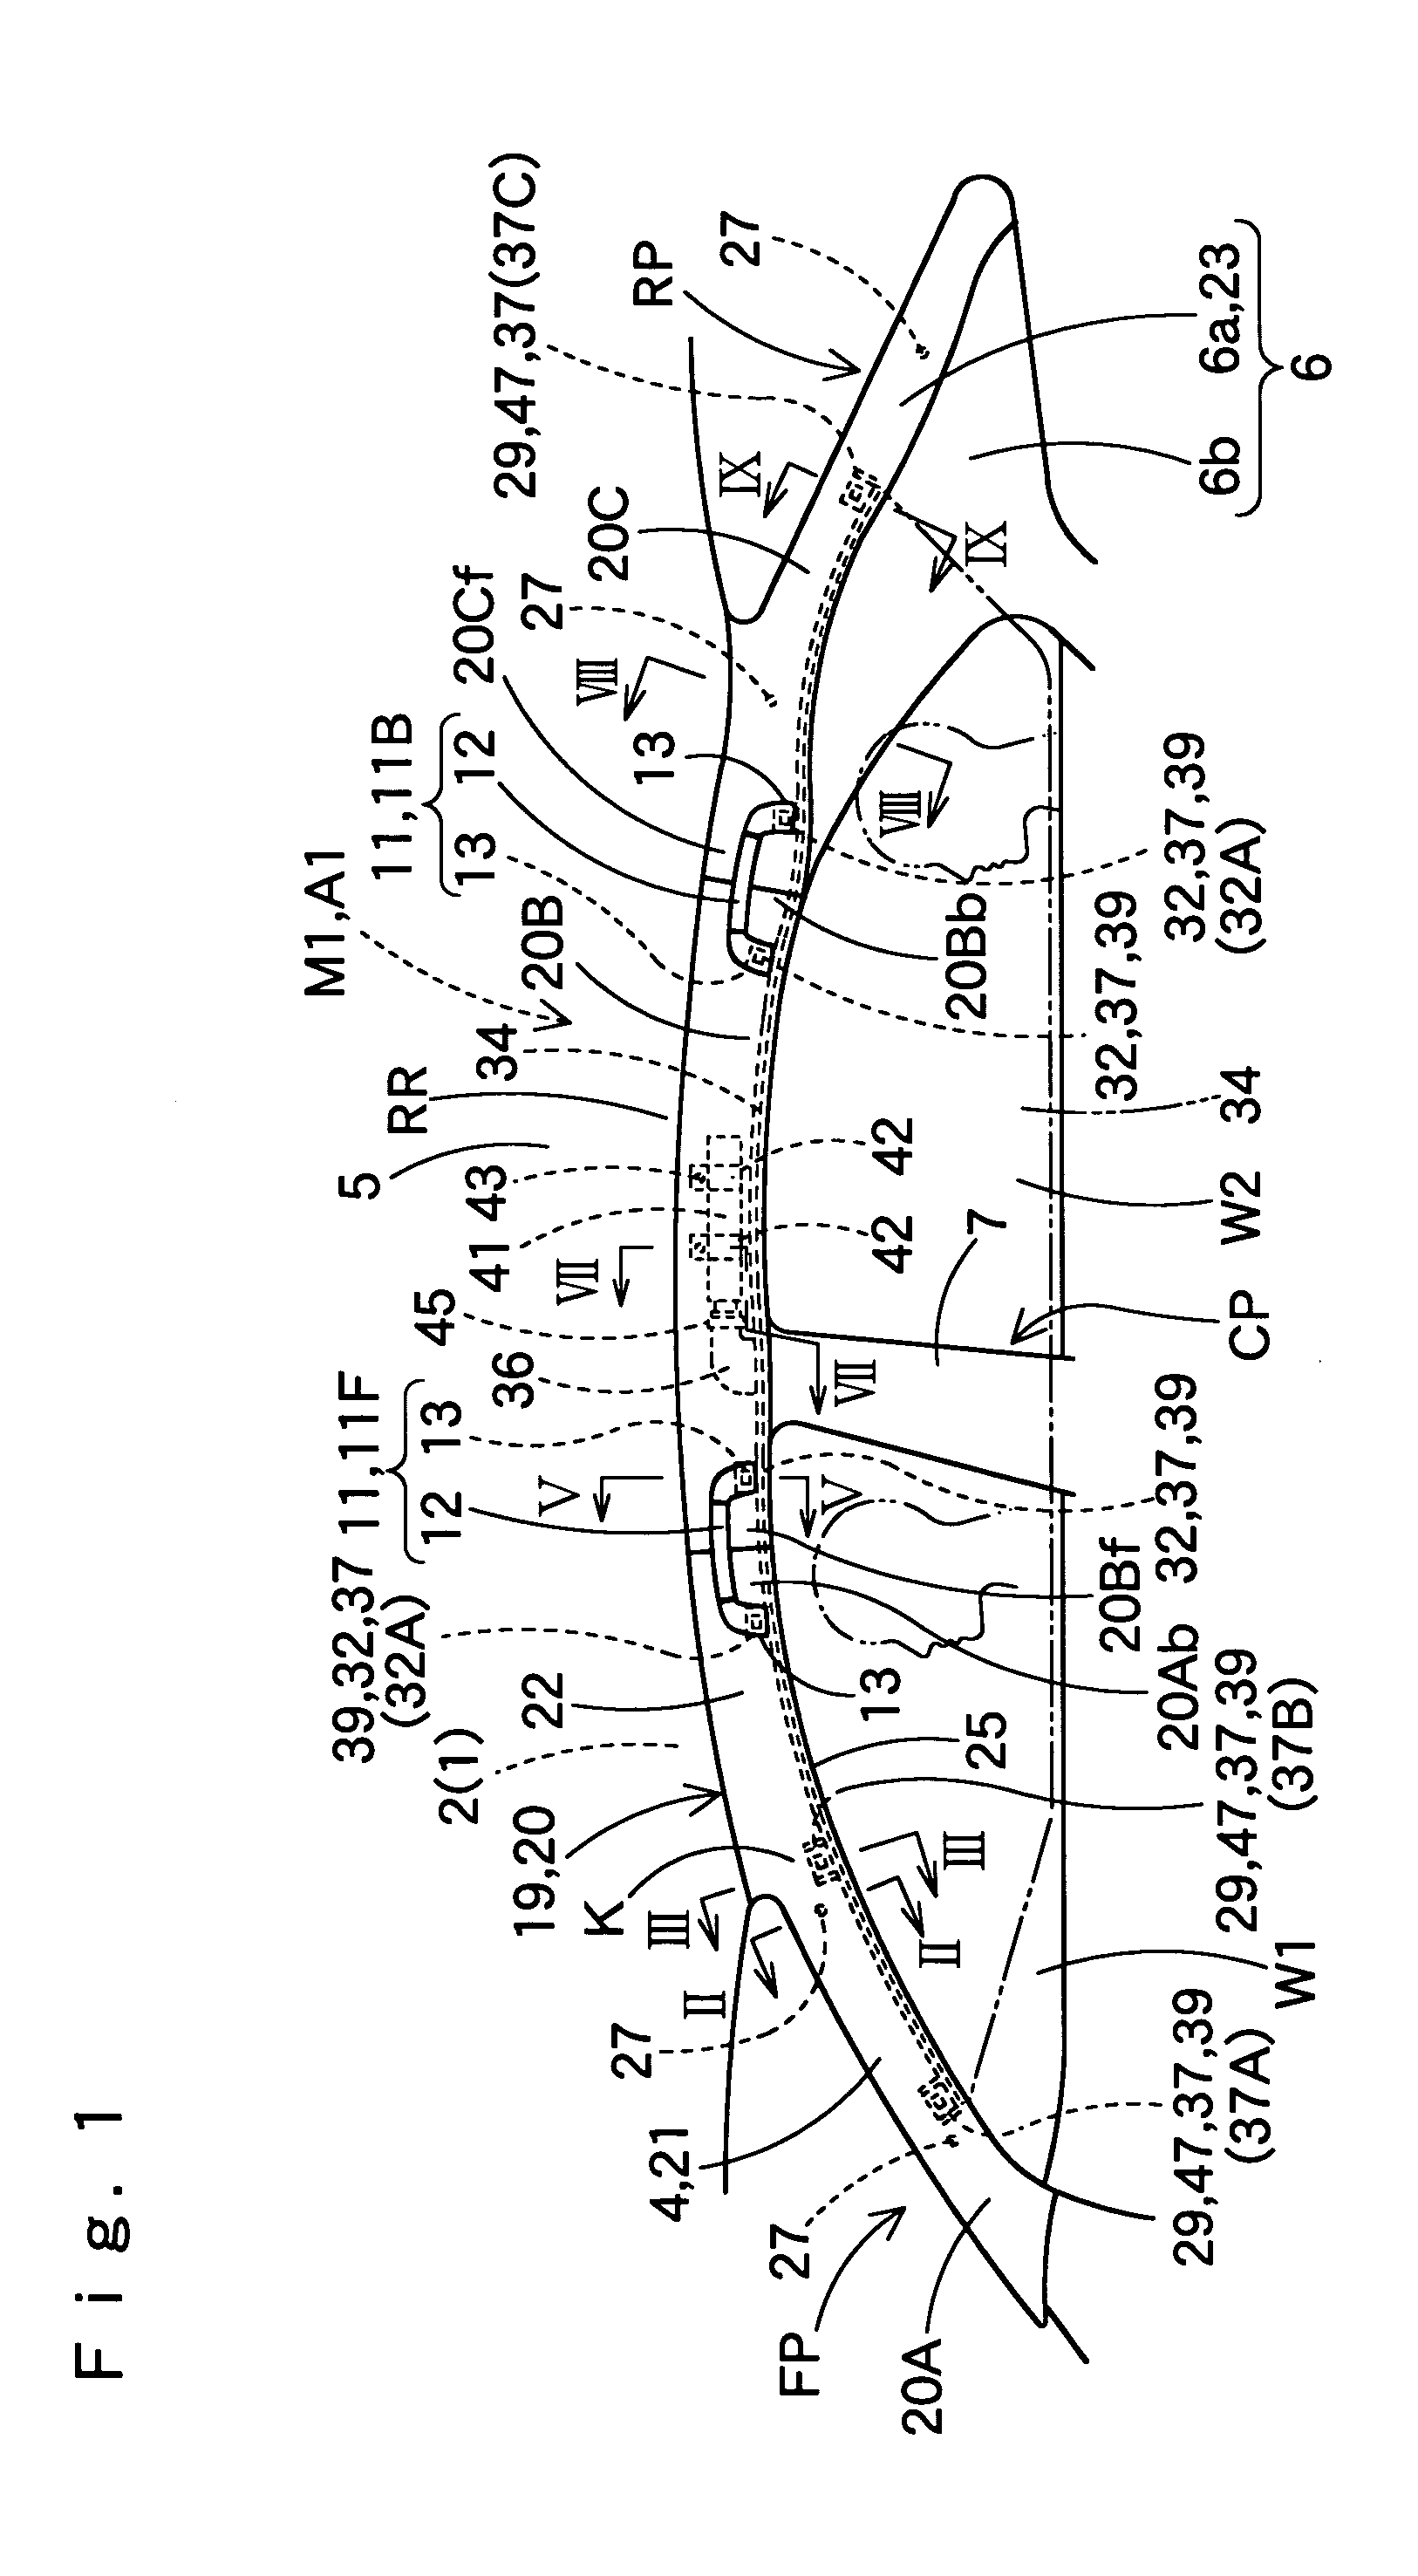 Head-protecting airbag device